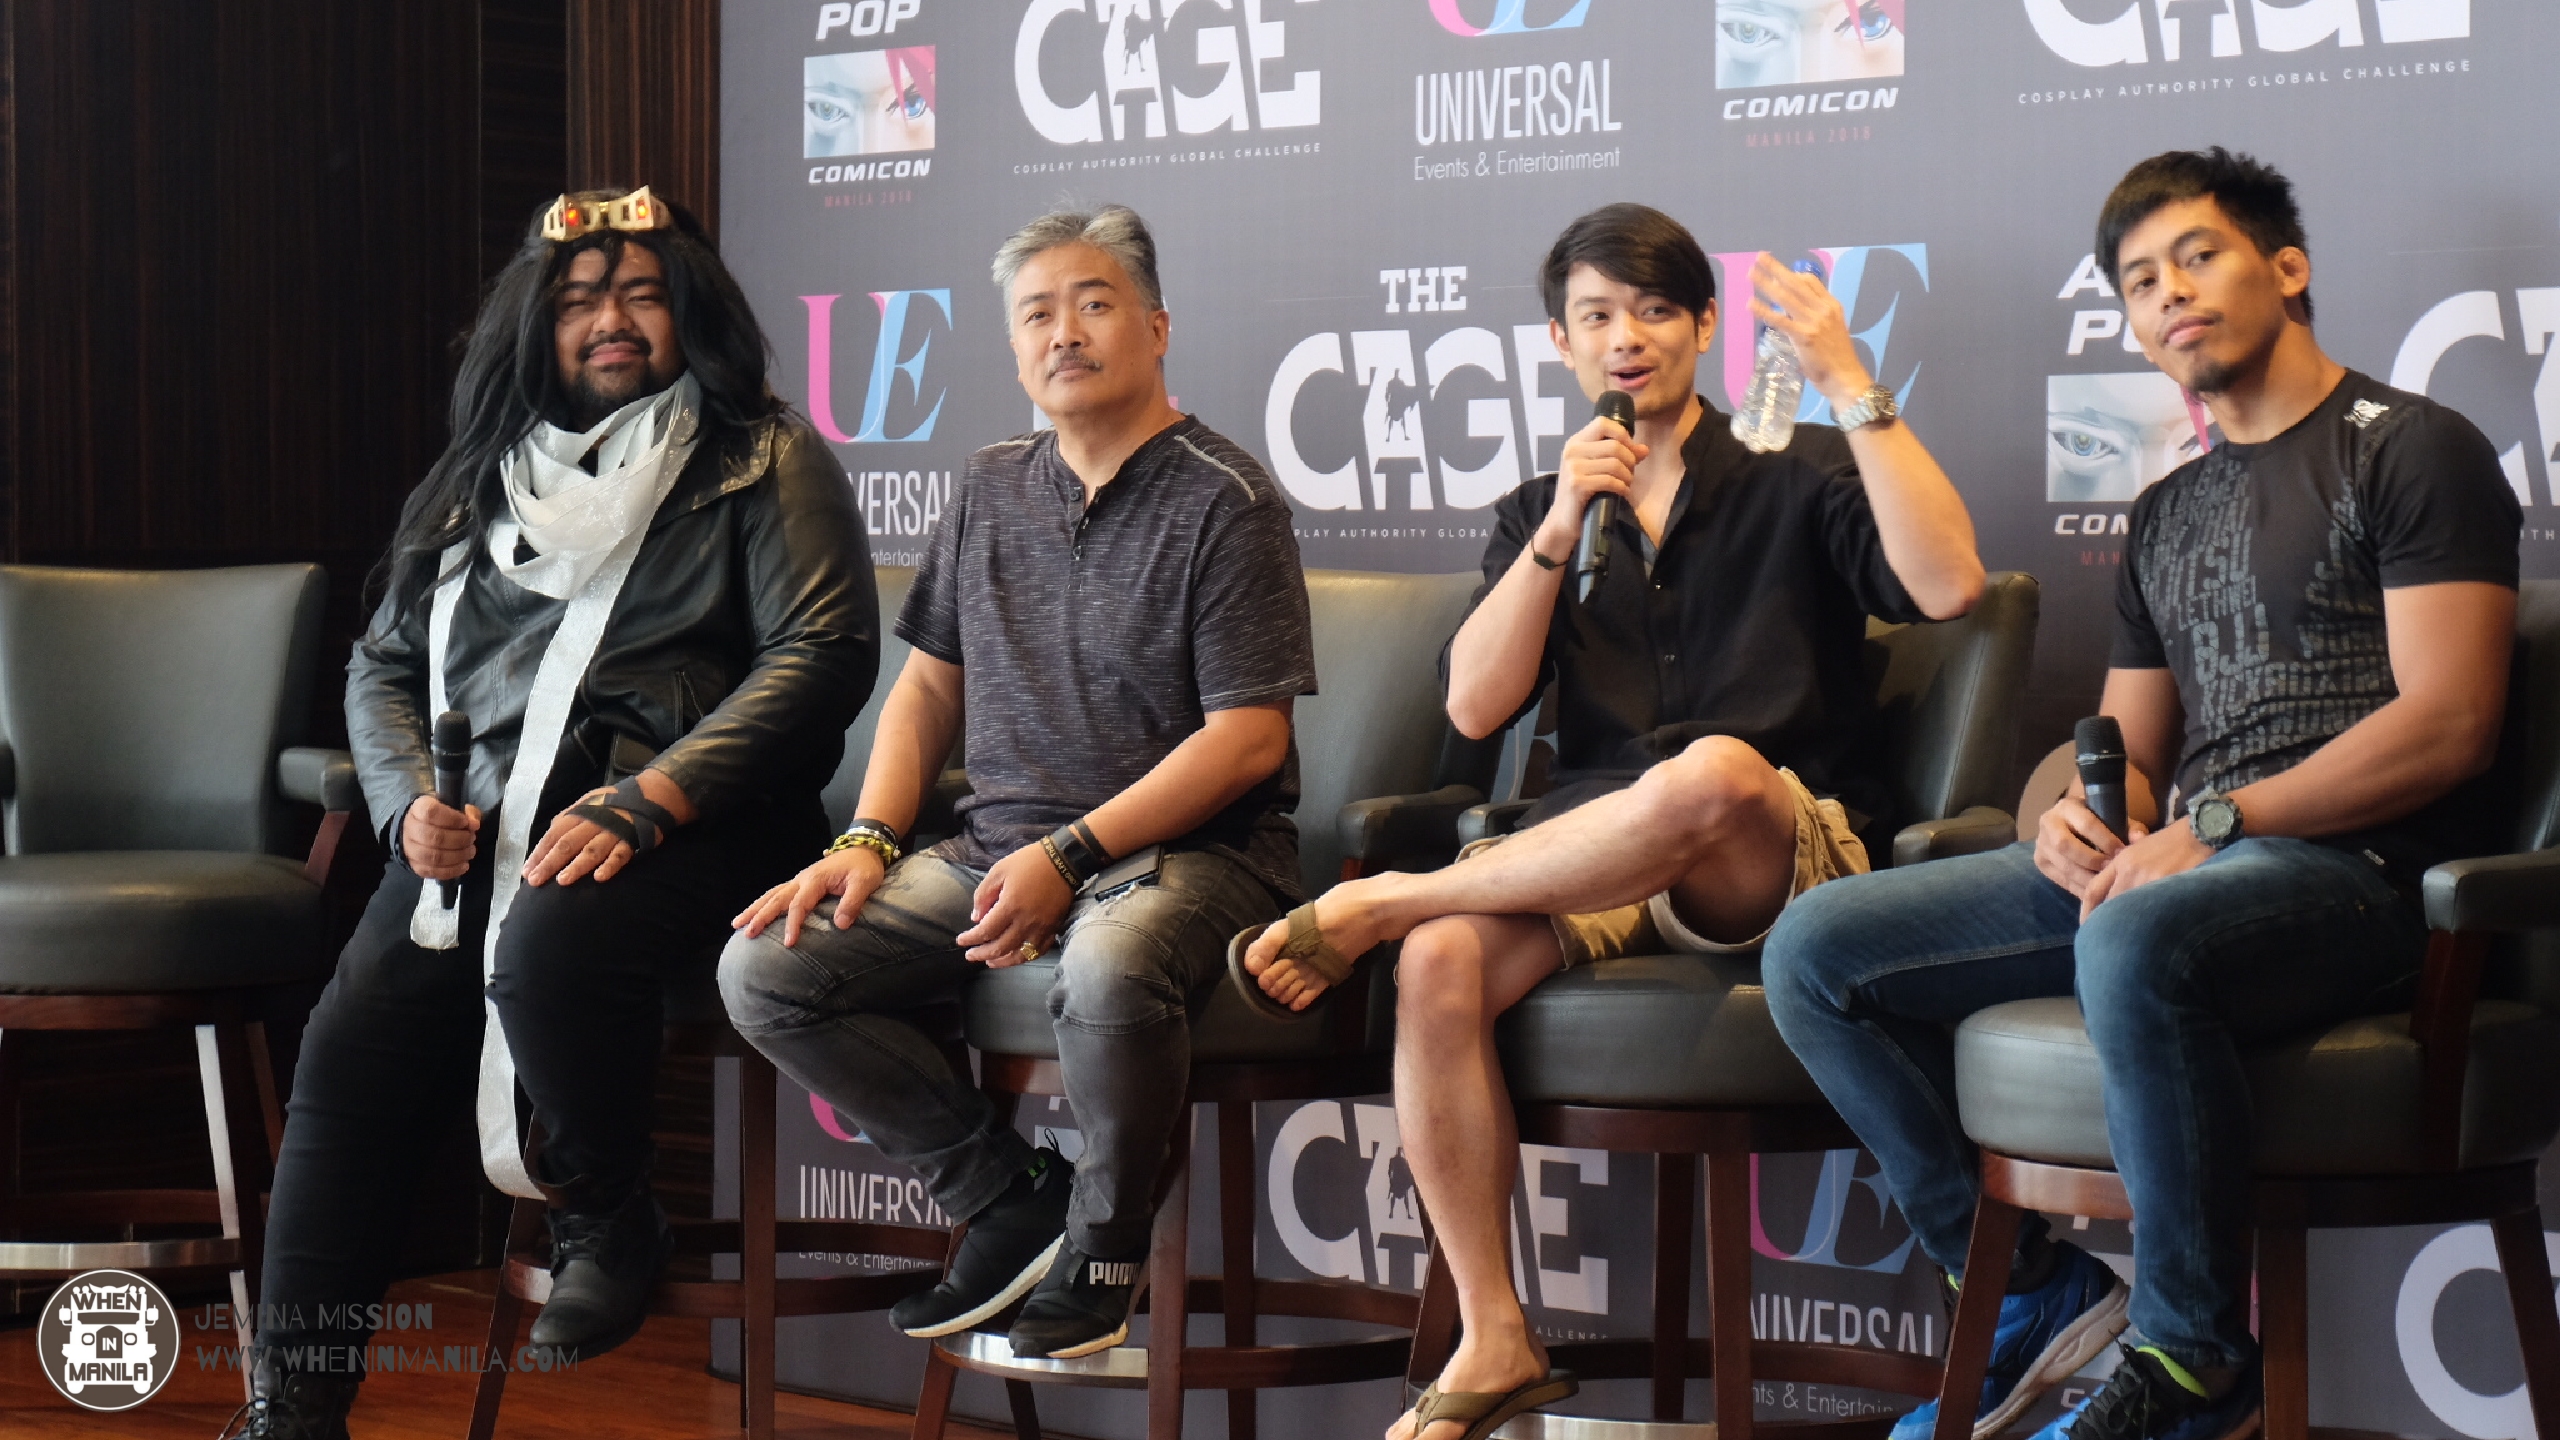 AsiaPOP Comicon 2018 Supernatural Actor Osric Chau Sees Pinoys as Professional Fans